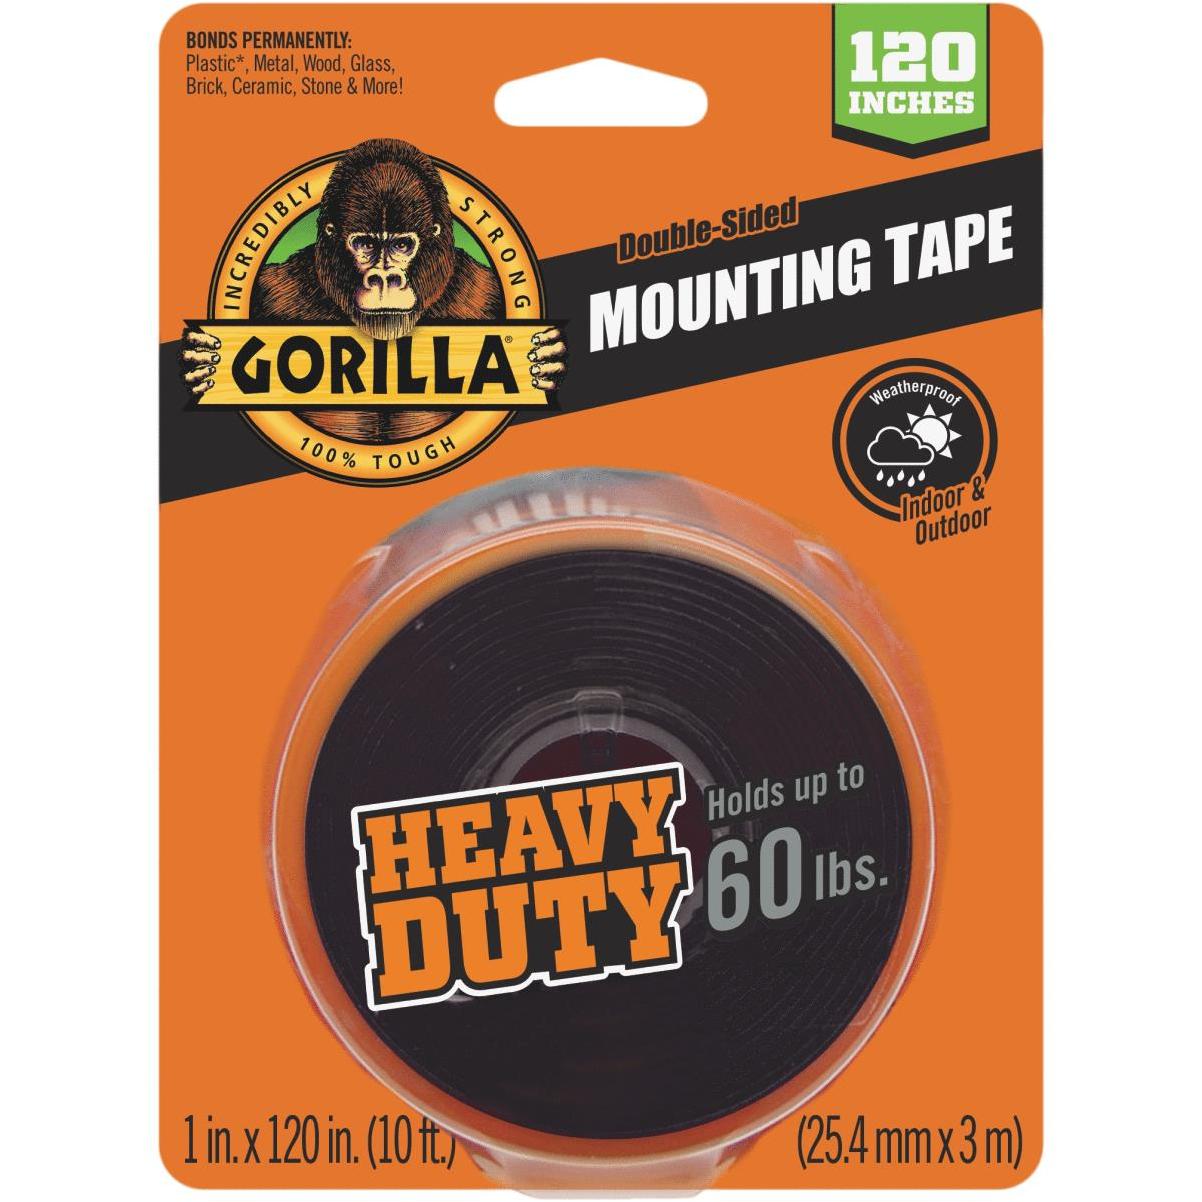 Gorilla 1 In. x 150 In. Tough & Clear Double-Sided Mounting Tape